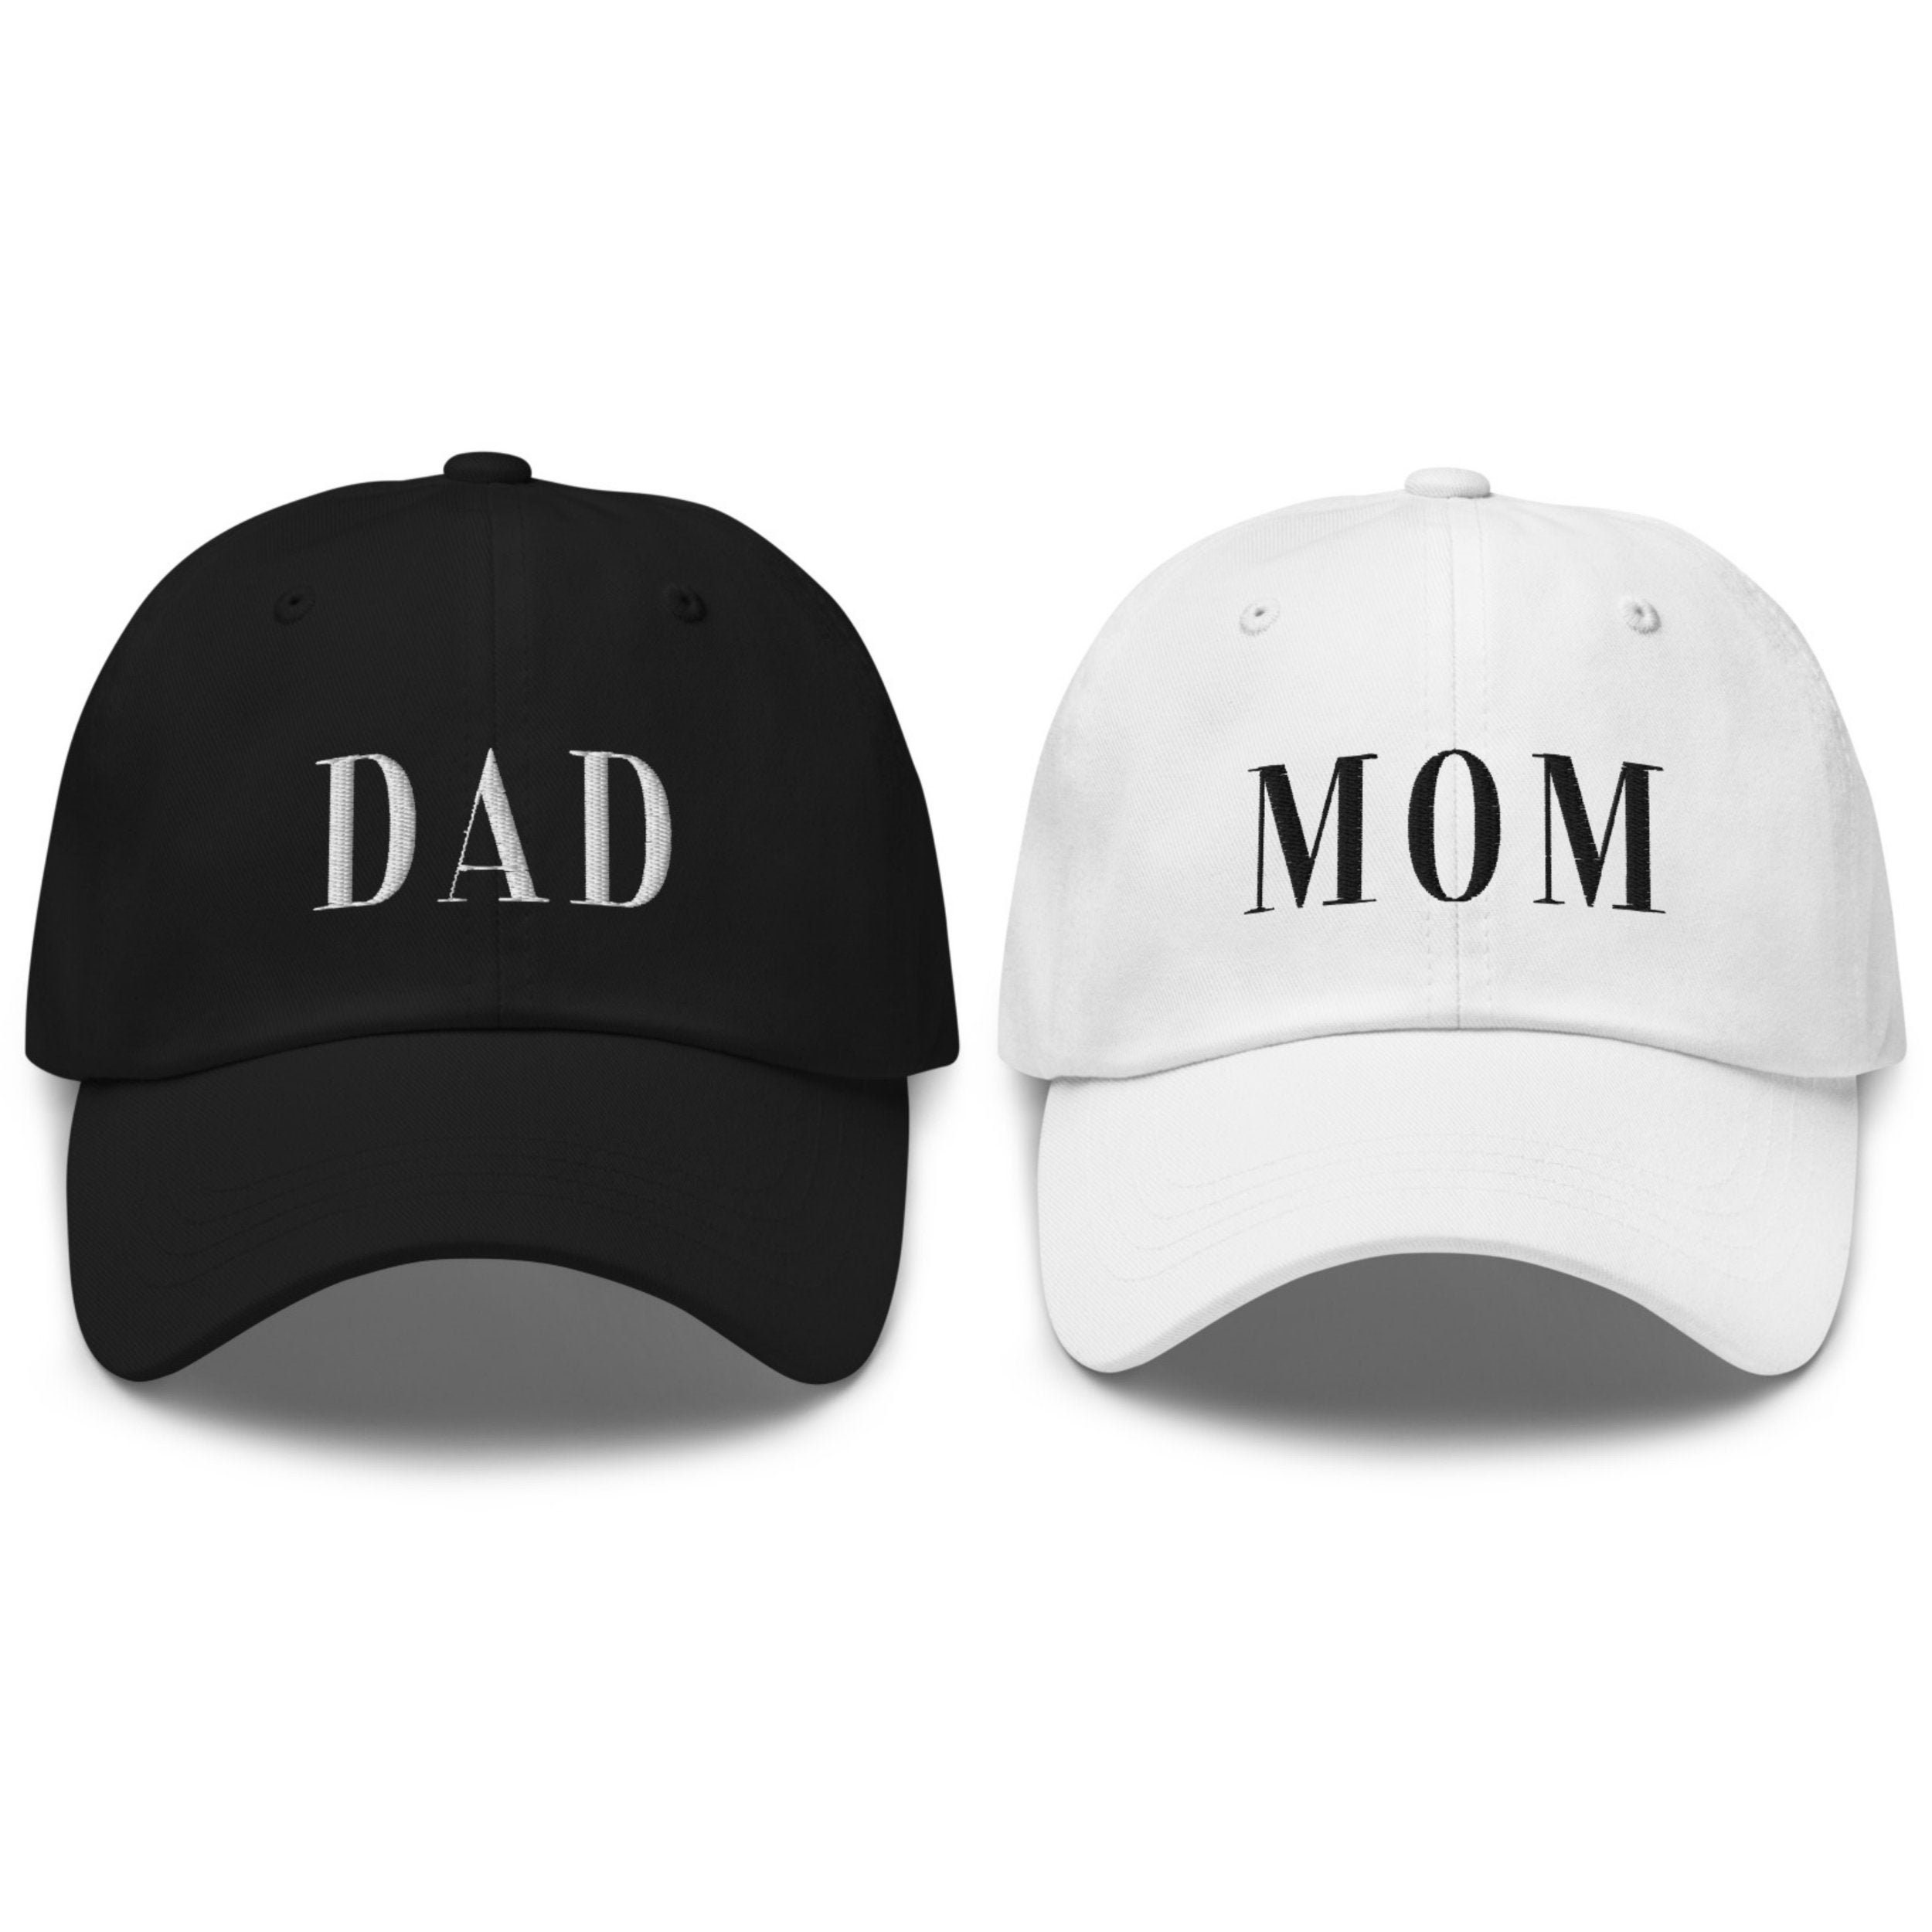 Mom and Dad Hats 